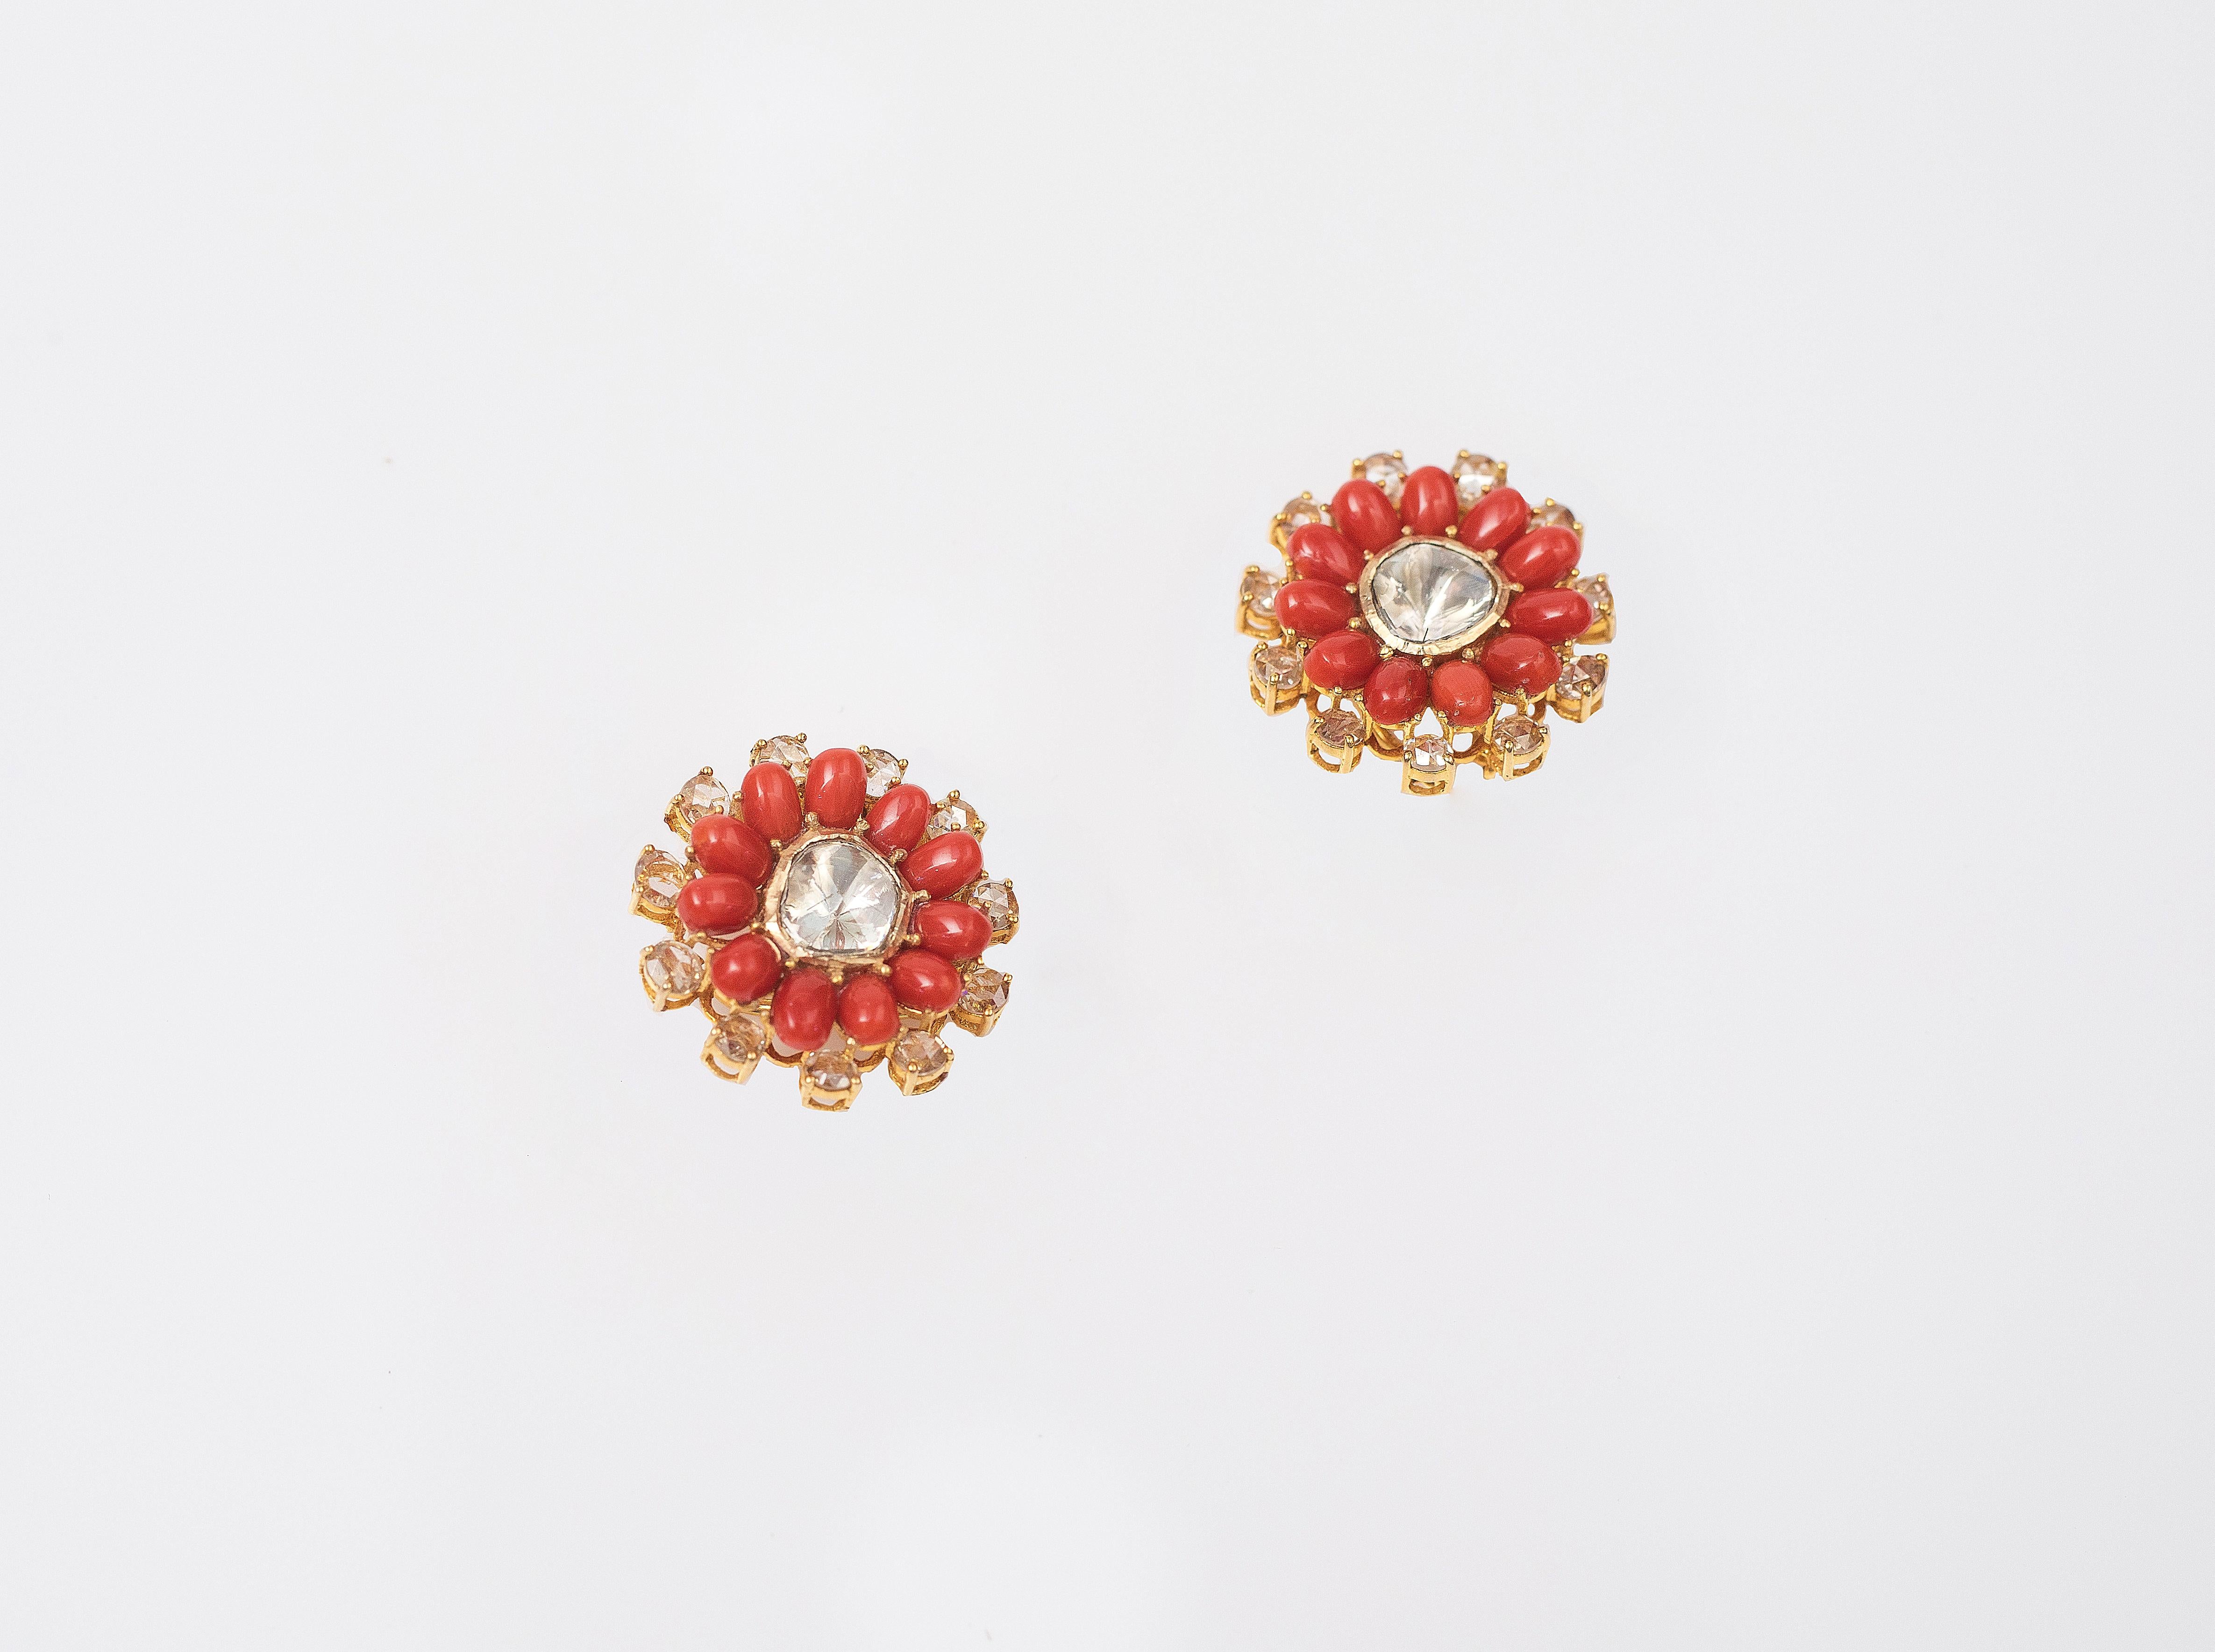 Anglo-Indian 3.20 Cts Flat Cut, Rose Cut Diamonds and Coral Stud Earring in 14k Gold For Sale